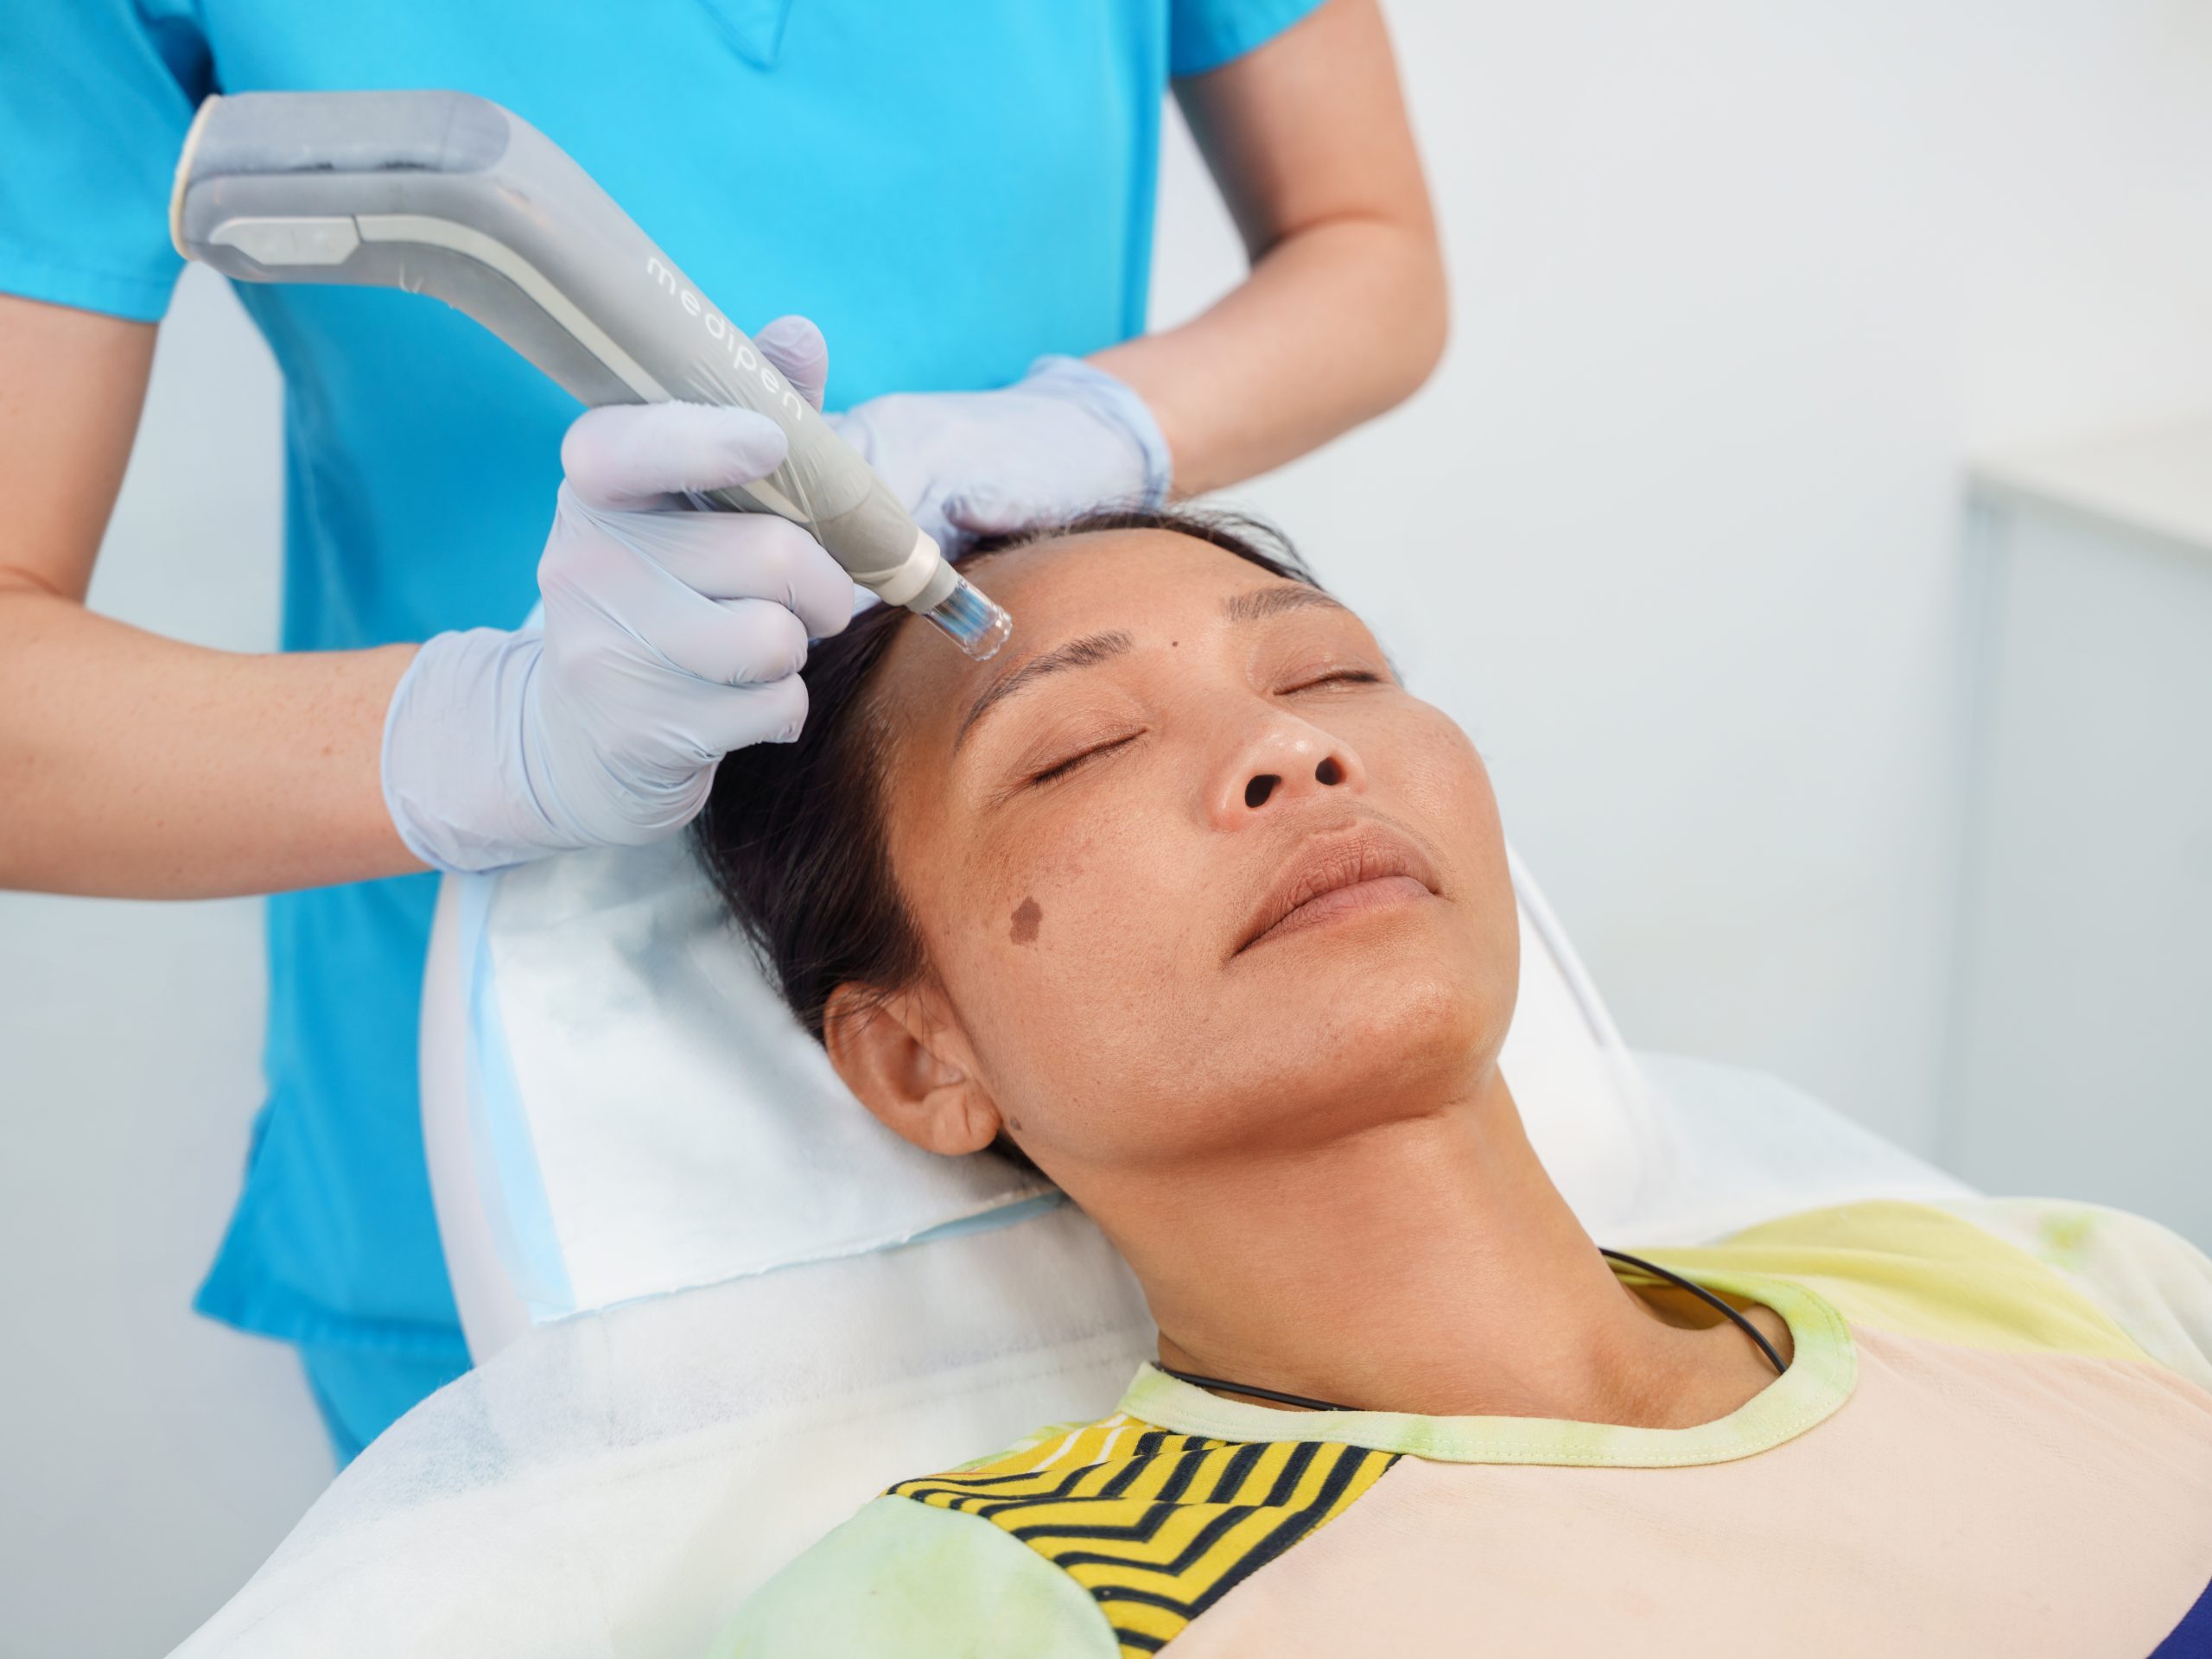 Our powerhouse treatment: Microneedling